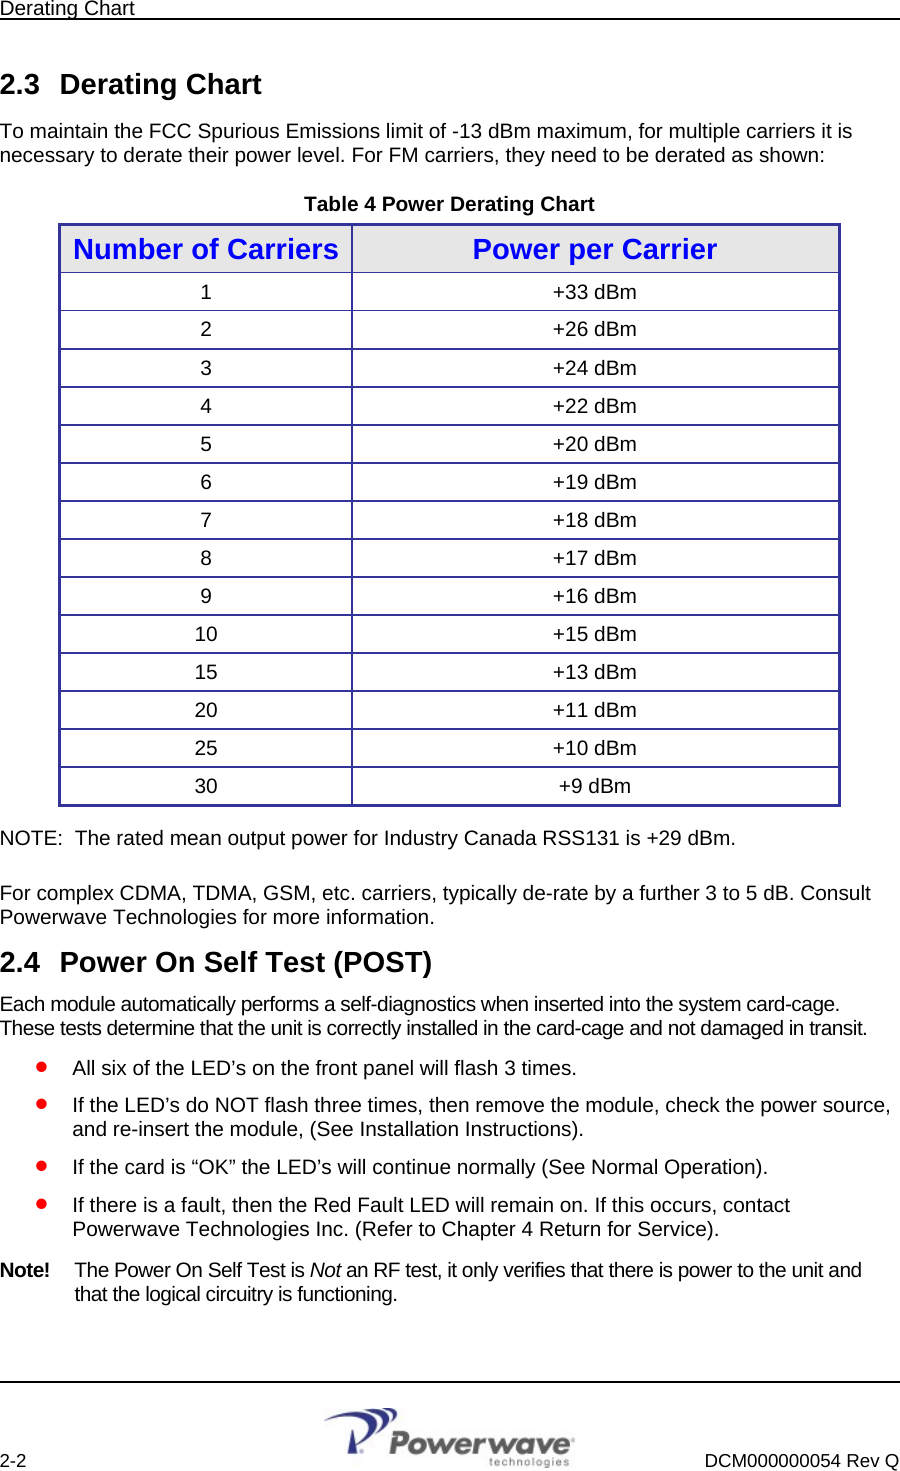 Derating Chart        2-2    DCM000000054 Rev Q  2.3 Derating Chart To maintain the FCC Spurious Emissions limit of -13 dBm maximum, for multiple carriers it is necessary to derate their power level. For FM carriers, they need to be derated as shown: Table 4 Power Derating Chart Number of Carriers Power per Carrier 1 +33 dBm 2 +26 dBm 3 +24 dBm 4 +22 dBm 5 +20 dBm 6 +19 dBm 7 +18 dBm 8 +17 dBm 9 +16 dBm 10 +15 dBm 15 +13 dBm 20 +11 dBm 25 +10 dBm 30 +9 dBm NOTE:  The rated mean output power for Industry Canada RSS131 is +29 dBm. For complex CDMA, TDMA, GSM, etc. carriers, typically de-rate by a further 3 to 5 dB. Consult Powerwave Technologies for more information. 2.4  Power On Self Test (POST) Each module automatically performs a self-diagnostics when inserted into the system card-cage. These tests determine that the unit is correctly installed in the card-cage and not damaged in transit.  • • • • All six of the LED’s on the front panel will flash 3 times. If the LED’s do NOT flash three times, then remove the module, check the power source, and re-insert the module, (See Installation Instructions). If the card is “OK” the LED’s will continue normally (See Normal Operation). If there is a fault, then the Red Fault LED will remain on. If this occurs, contact Powerwave Technologies Inc. (Refer to Chapter 4 Return for Service). Note!  The Power On Self Test is Not an RF test, it only verifies that there is power to the unit and that the logical circuitry is functioning. 